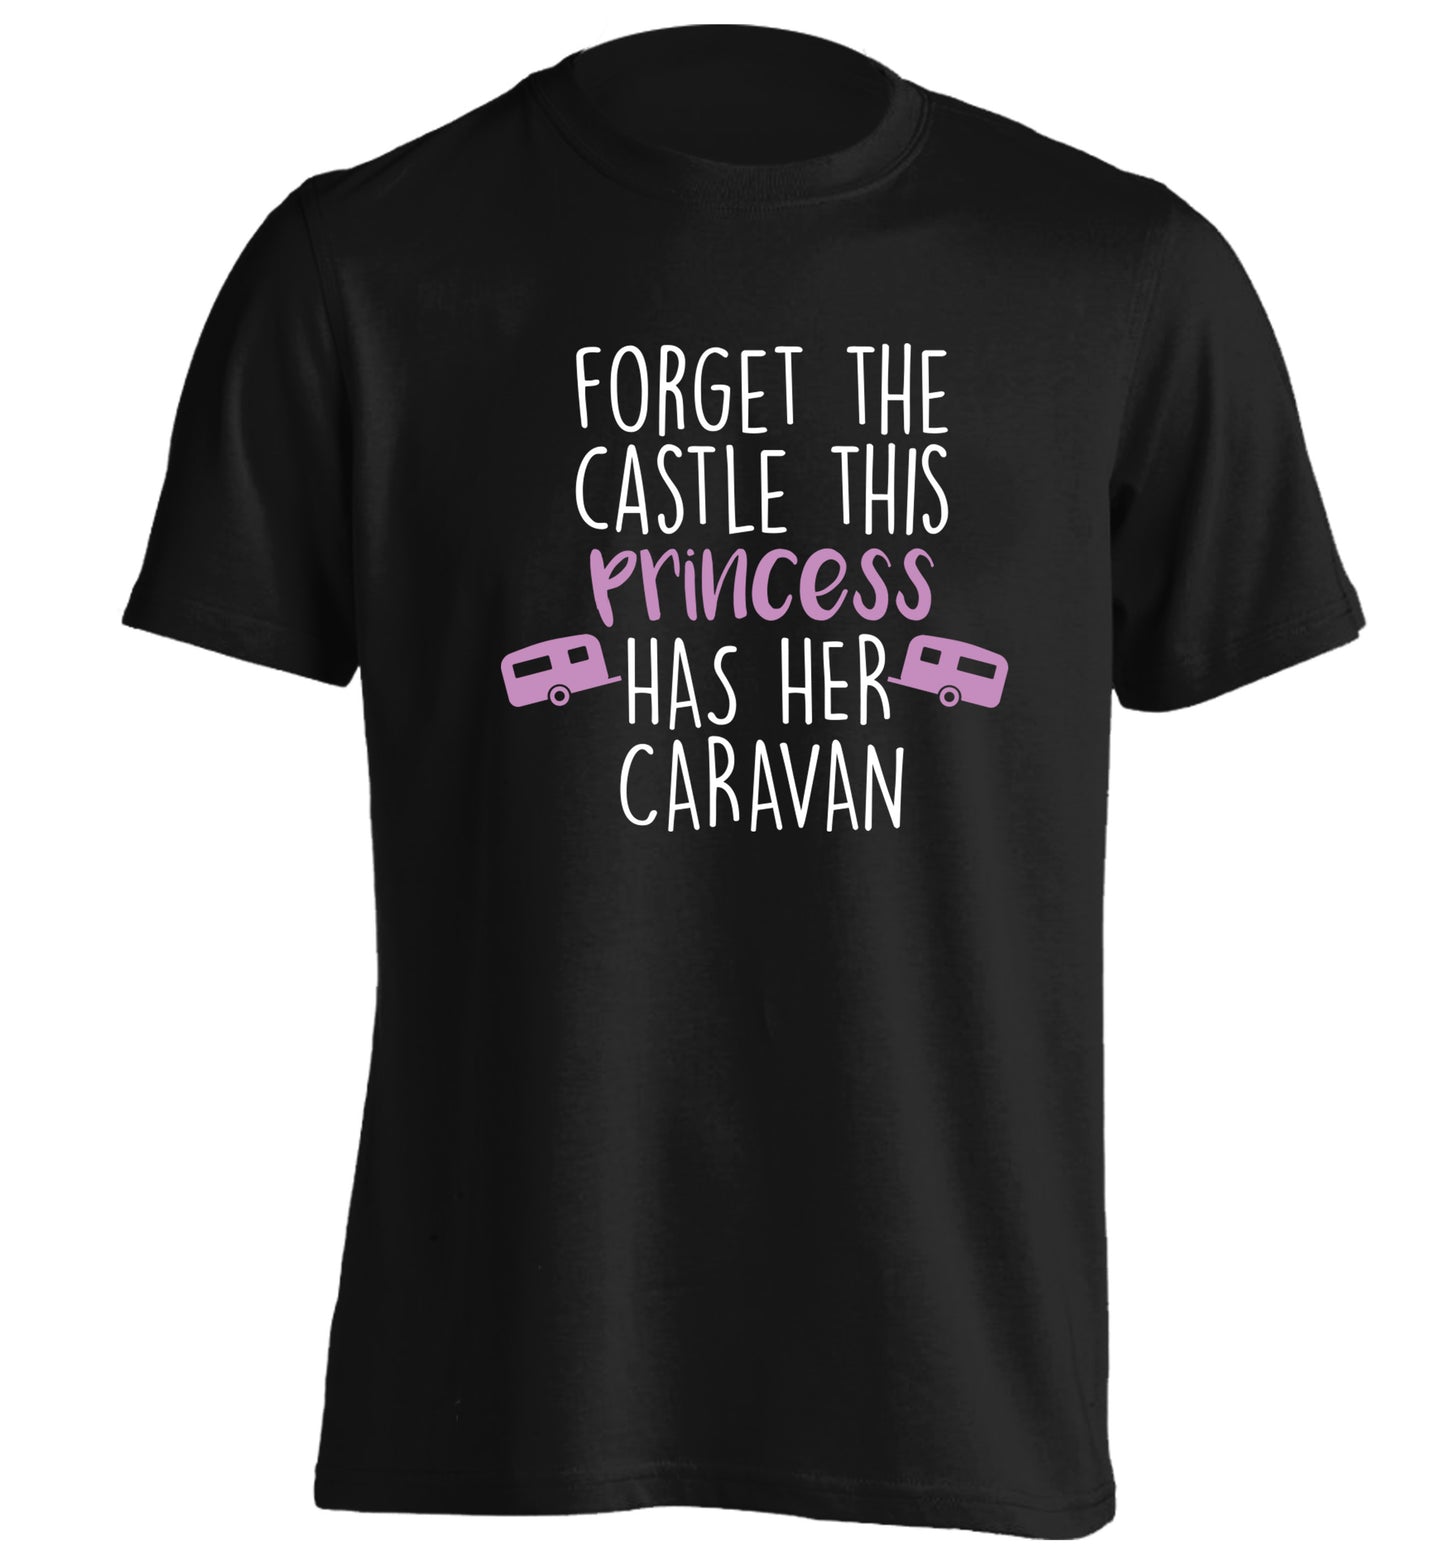 Forget the castle this princess lives at the caravan adults unisex black Tshirt 2XL